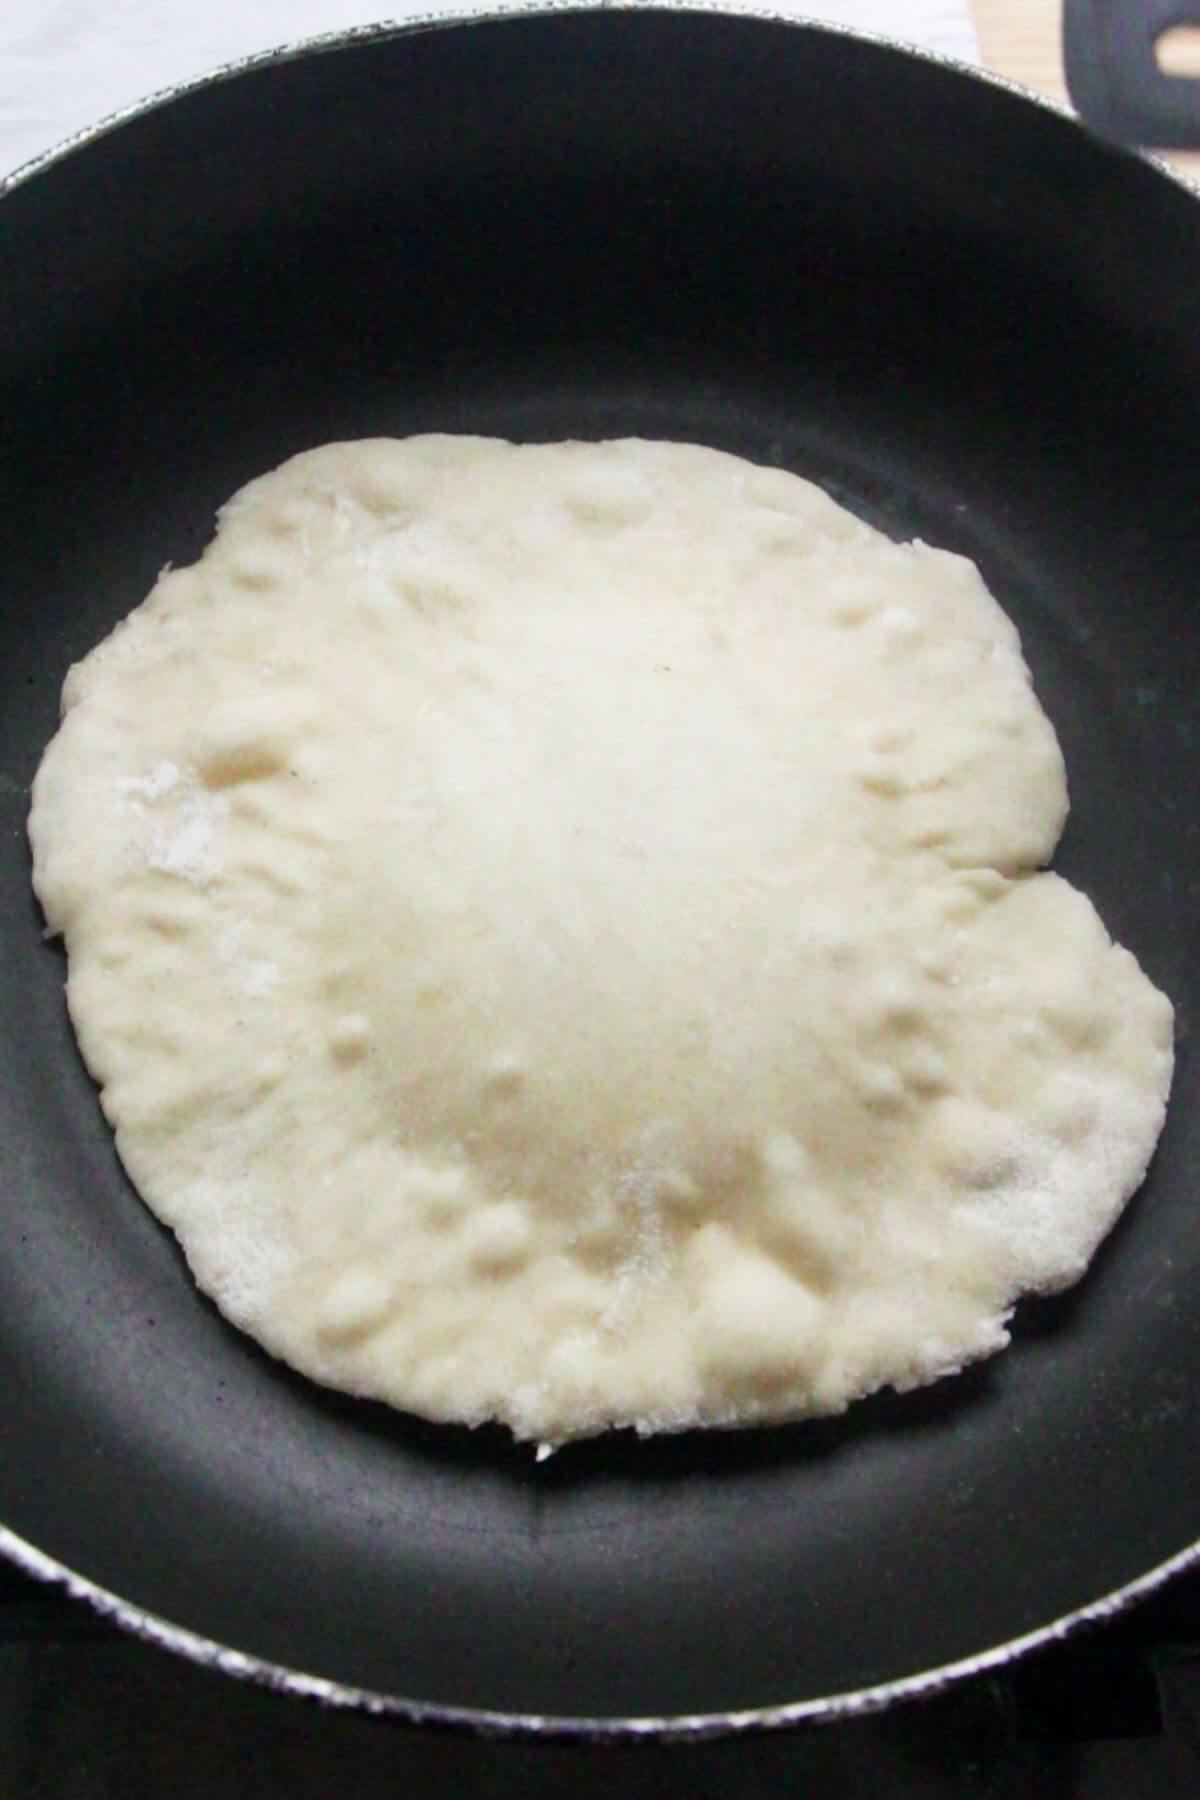 One naan in a small pan, puffing up as it cooks.